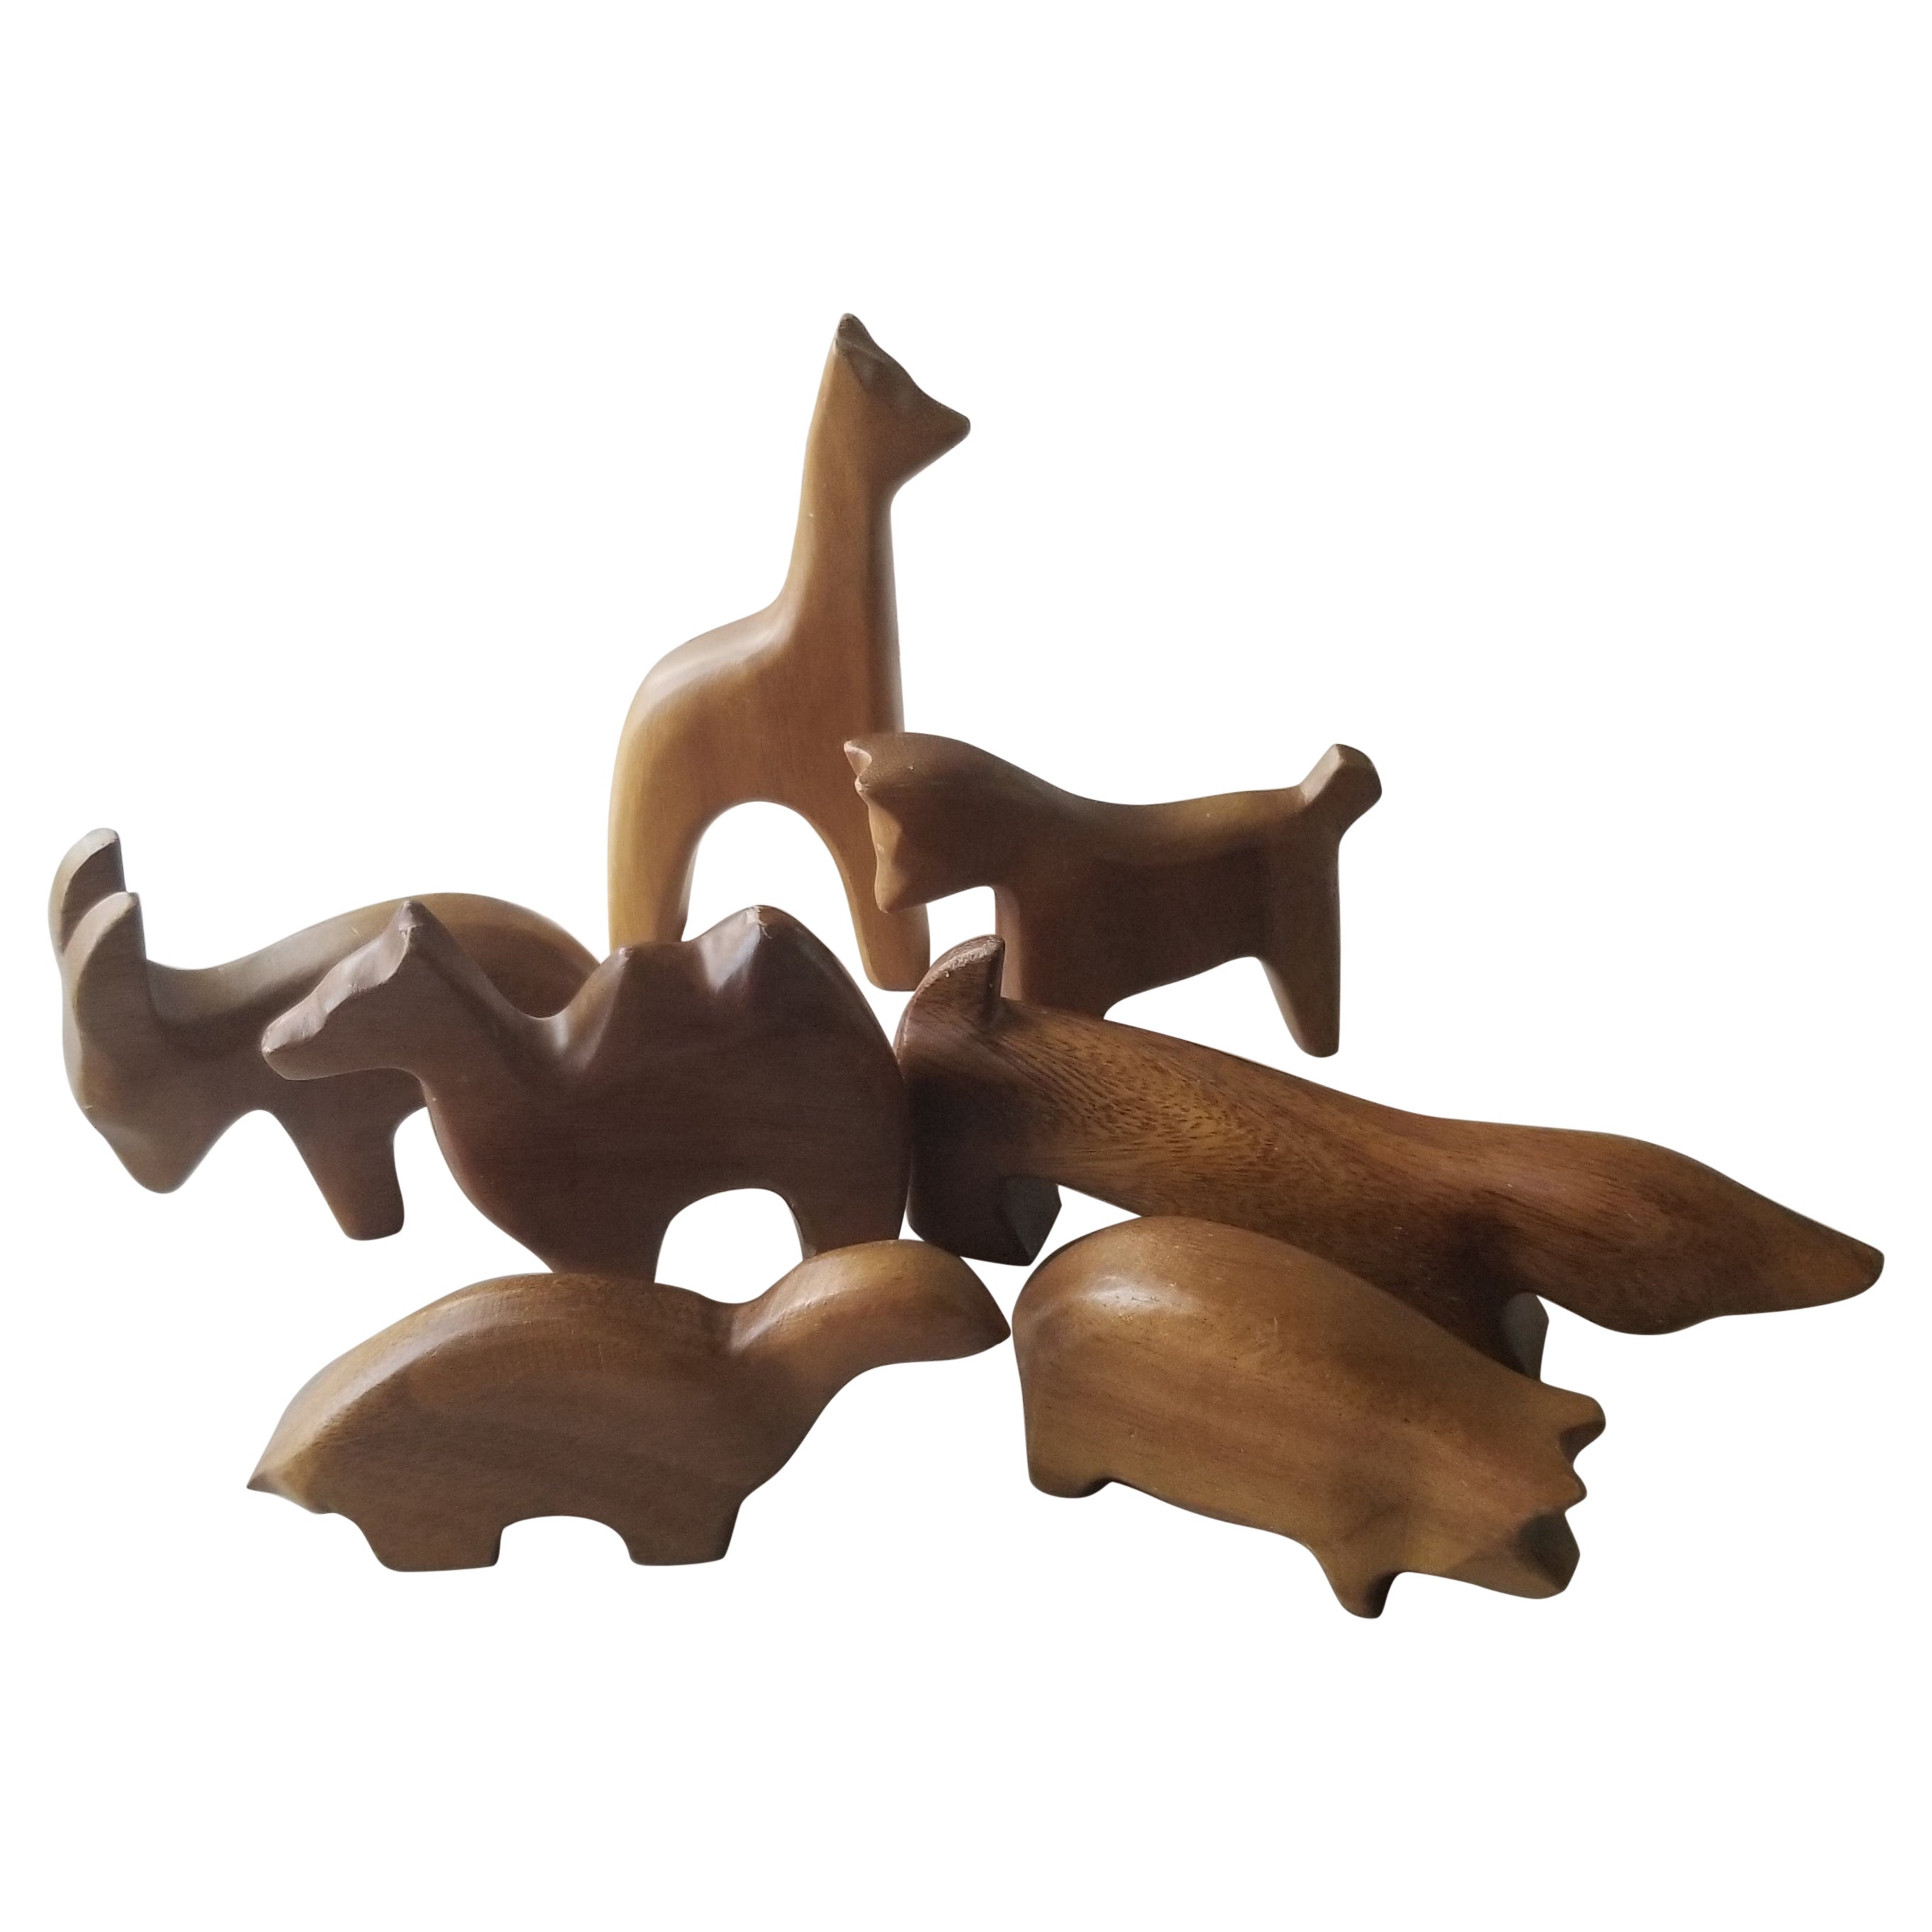 Scandinavian Modern 1950s Vintage Carved Wood Animal Collection Set of 7 Norway